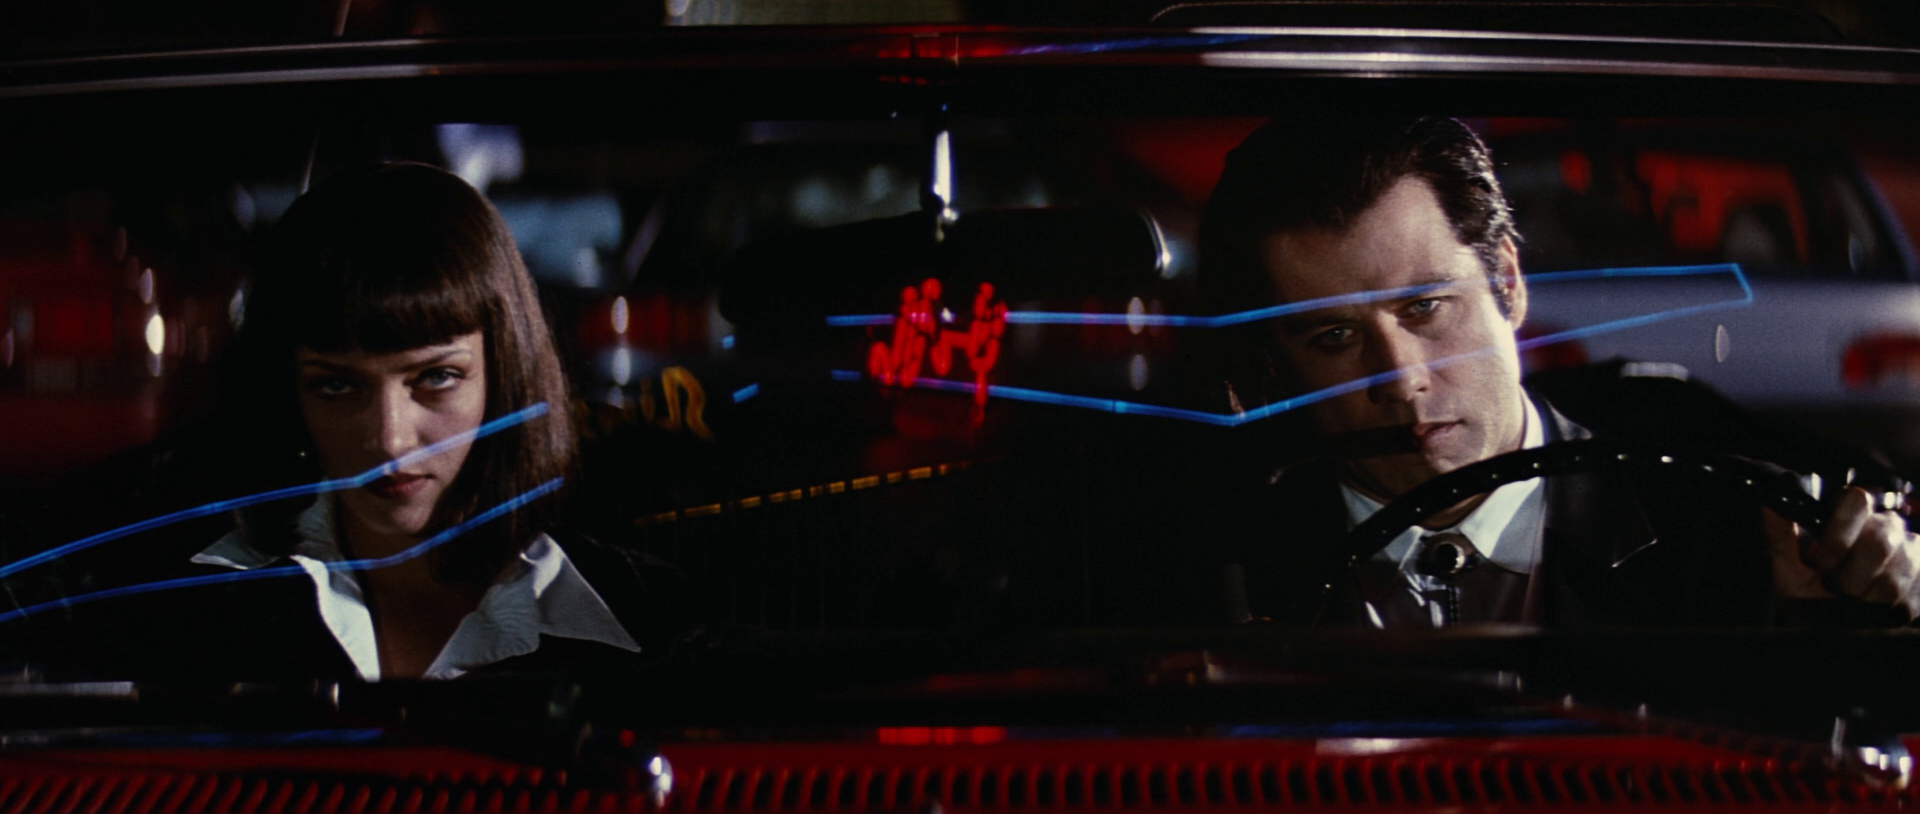 John Travolta drives a convertible sports car with Uma Thurman in the passenger seat in Pulp Fiction